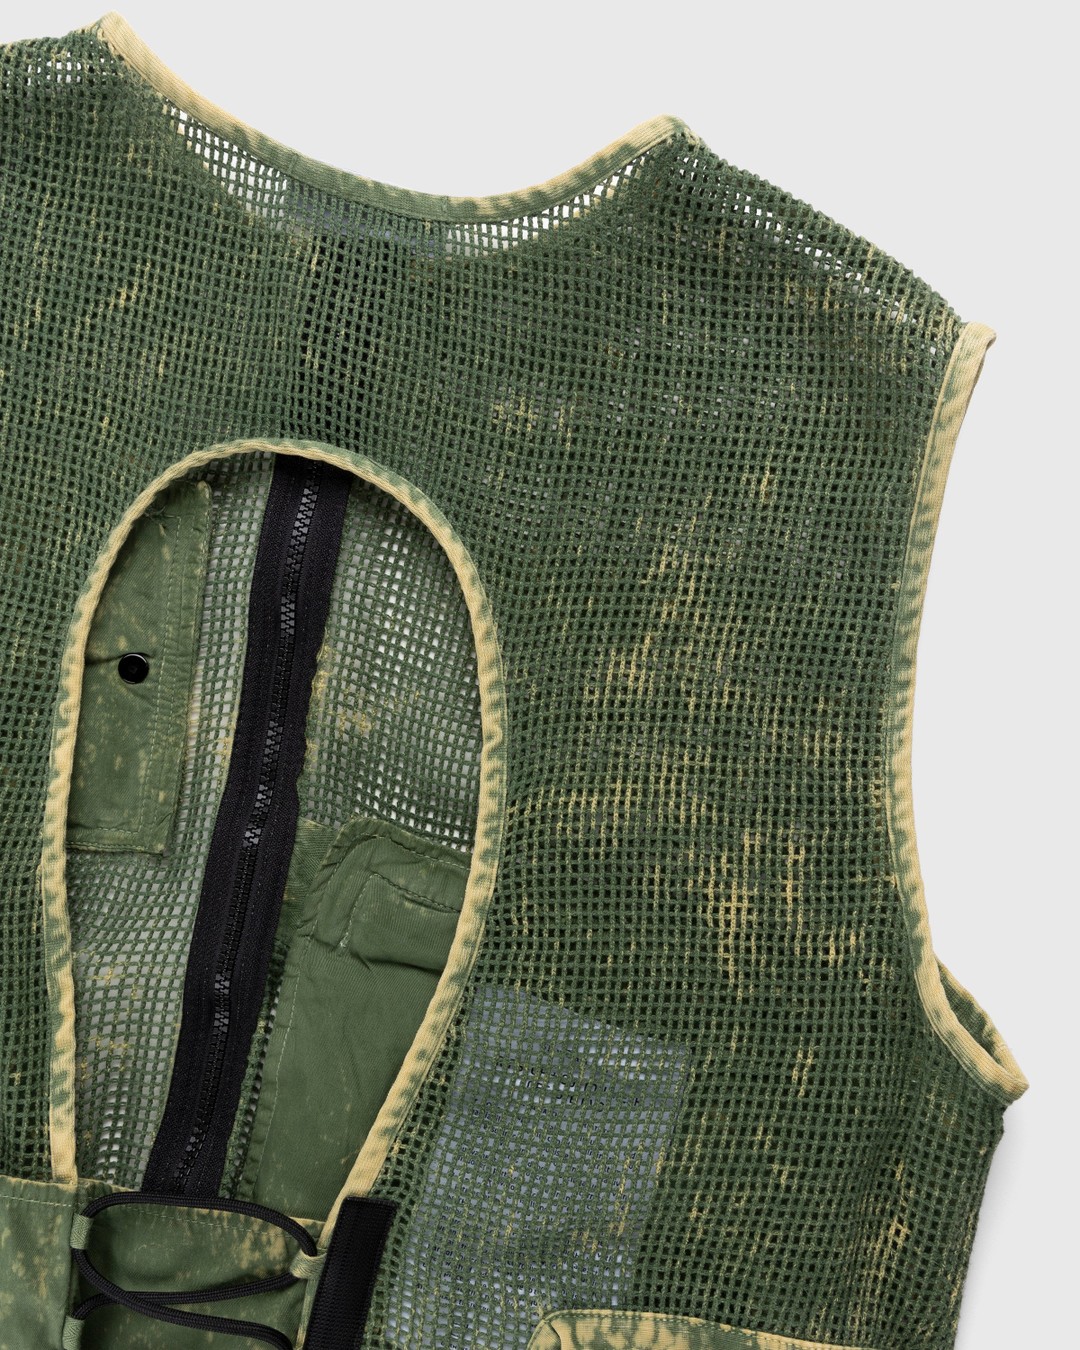 Stone Island – G0622 Garment-Dyed Cotton Mesh Vest Olive - Outerwear - Green - Image 4